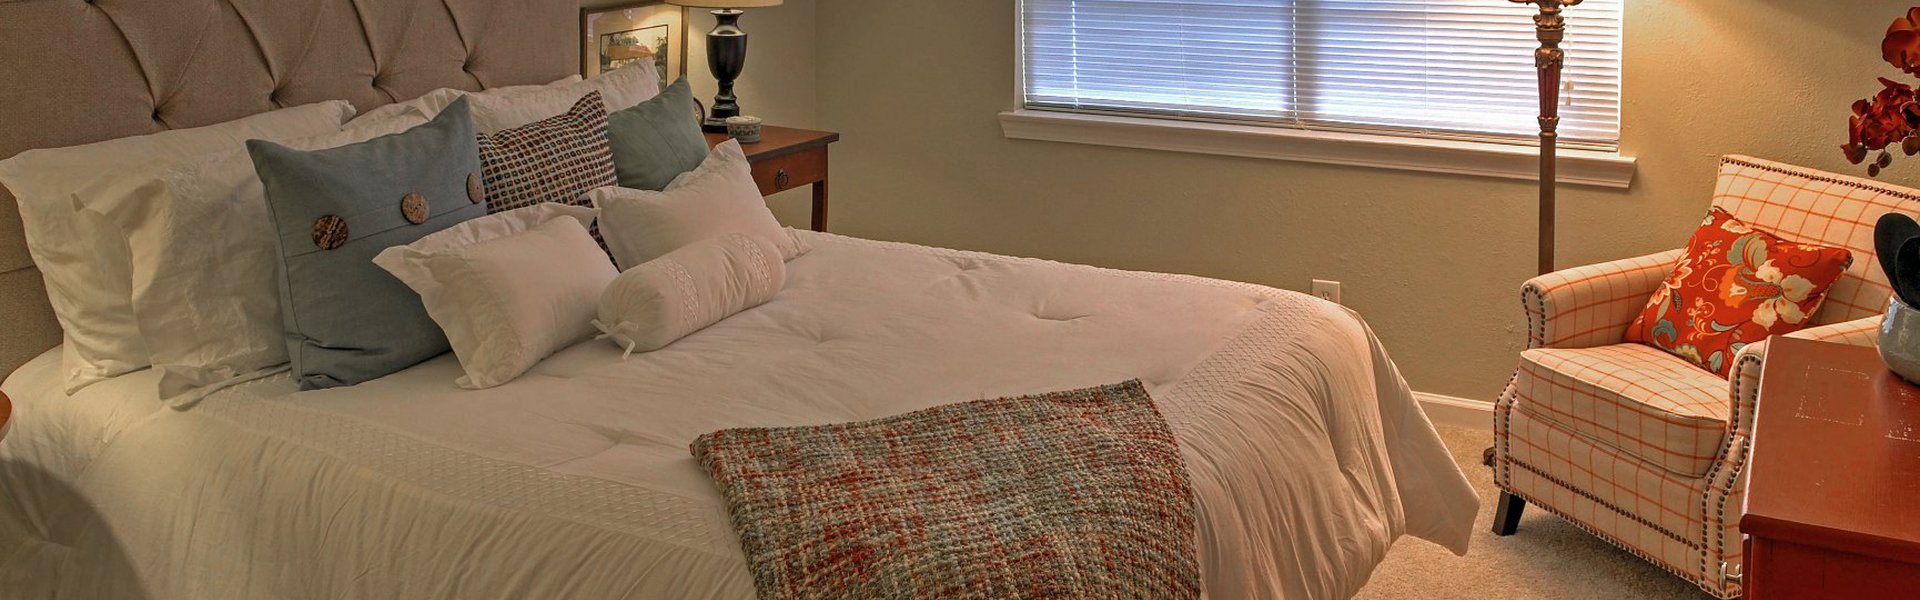 Westside Commons interior apartment. Spacious room with queen bed and night table